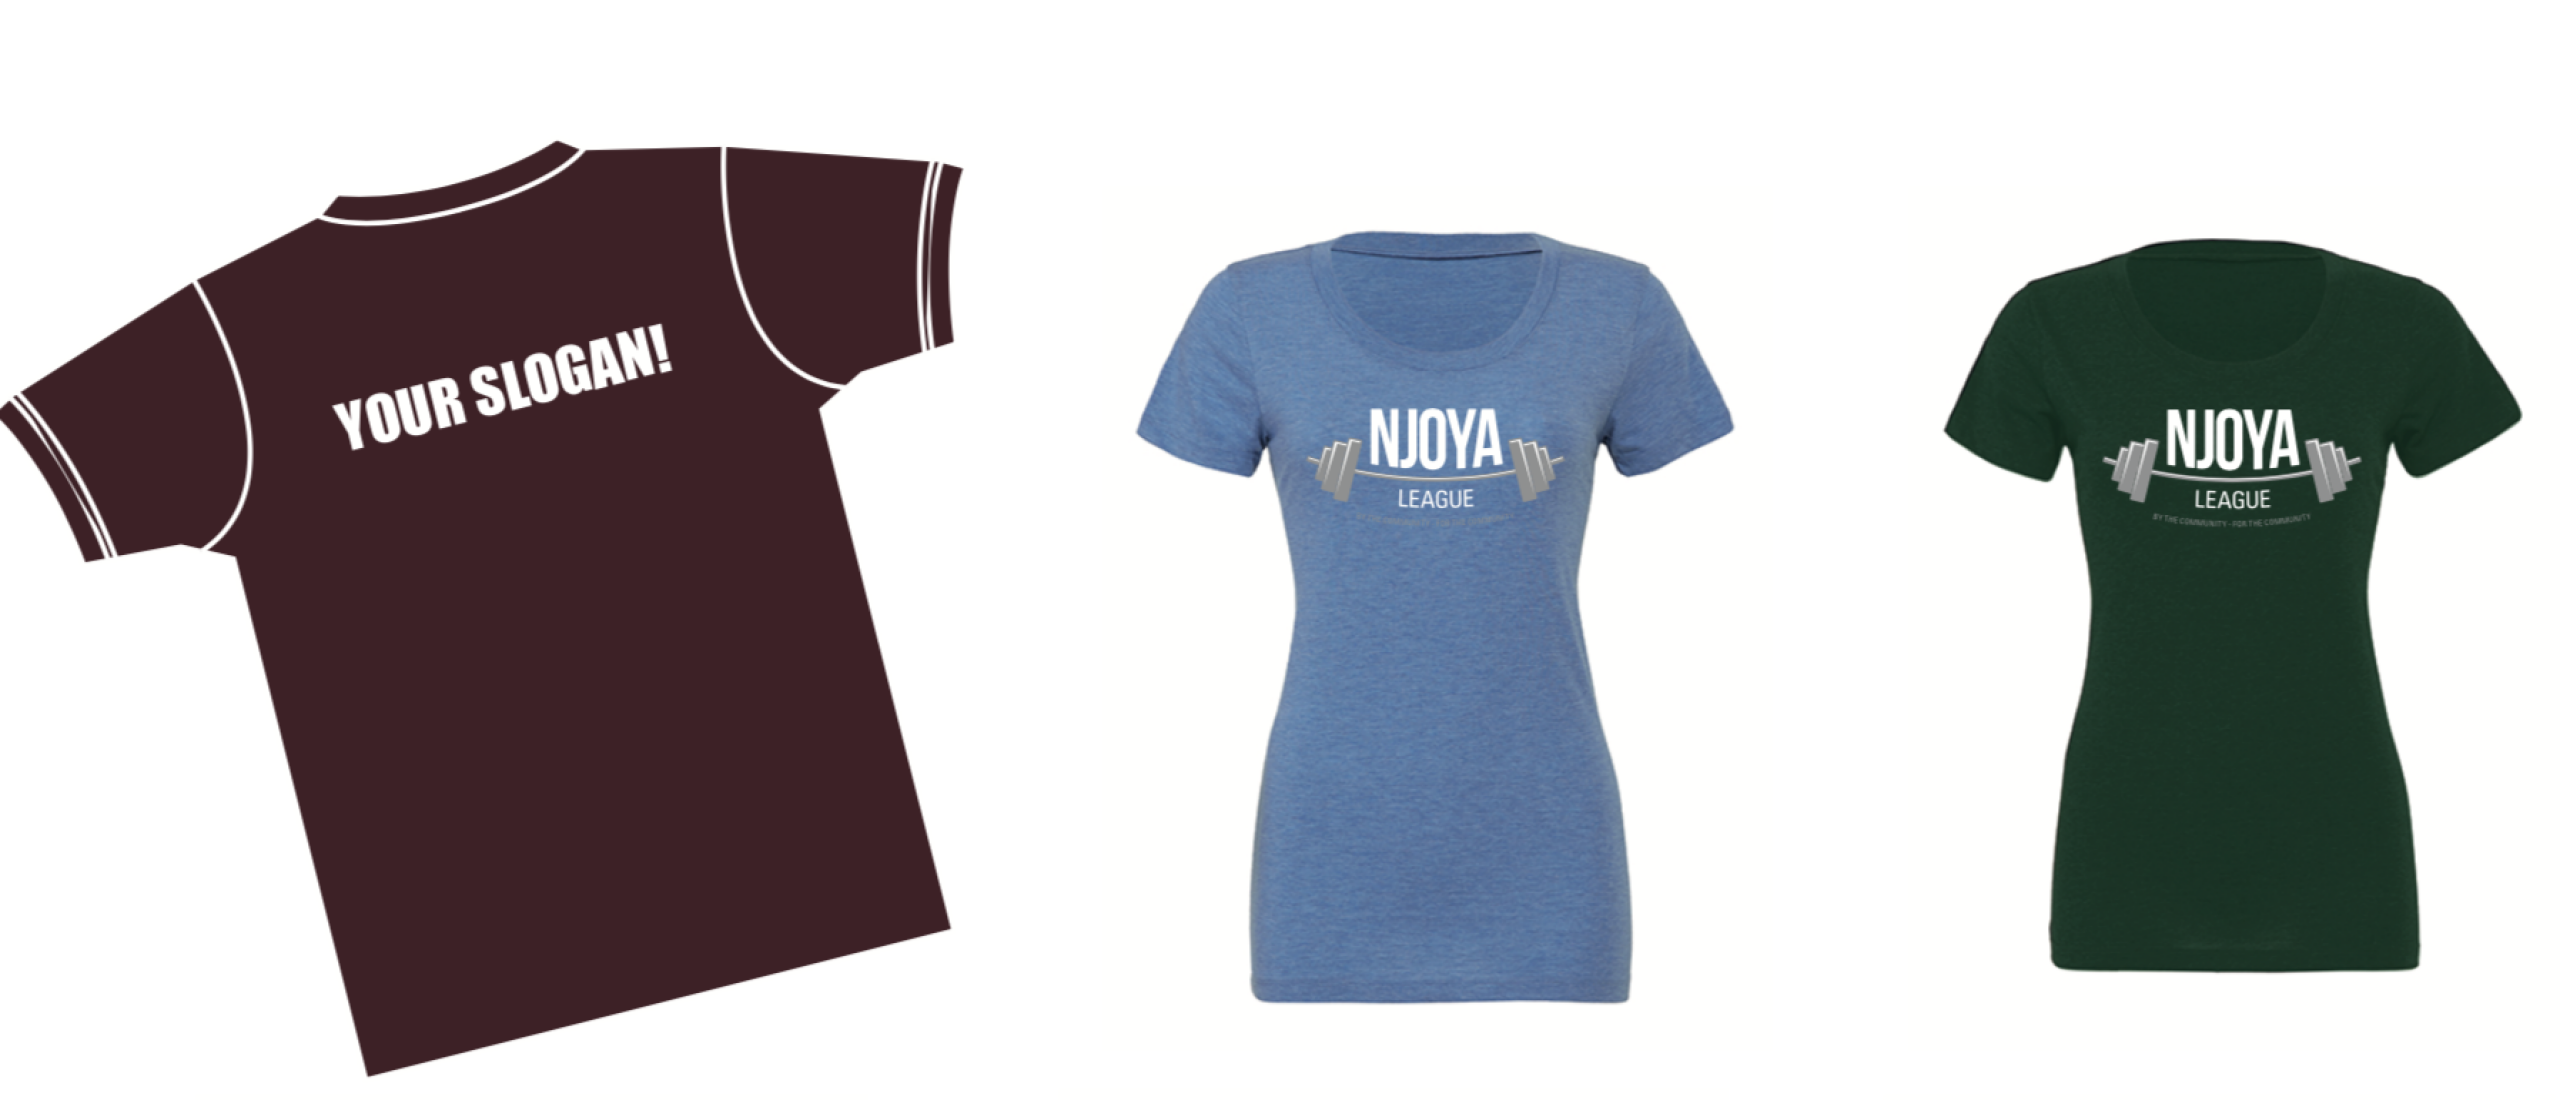 create-your-njoya-league-t-shirt-with to impress